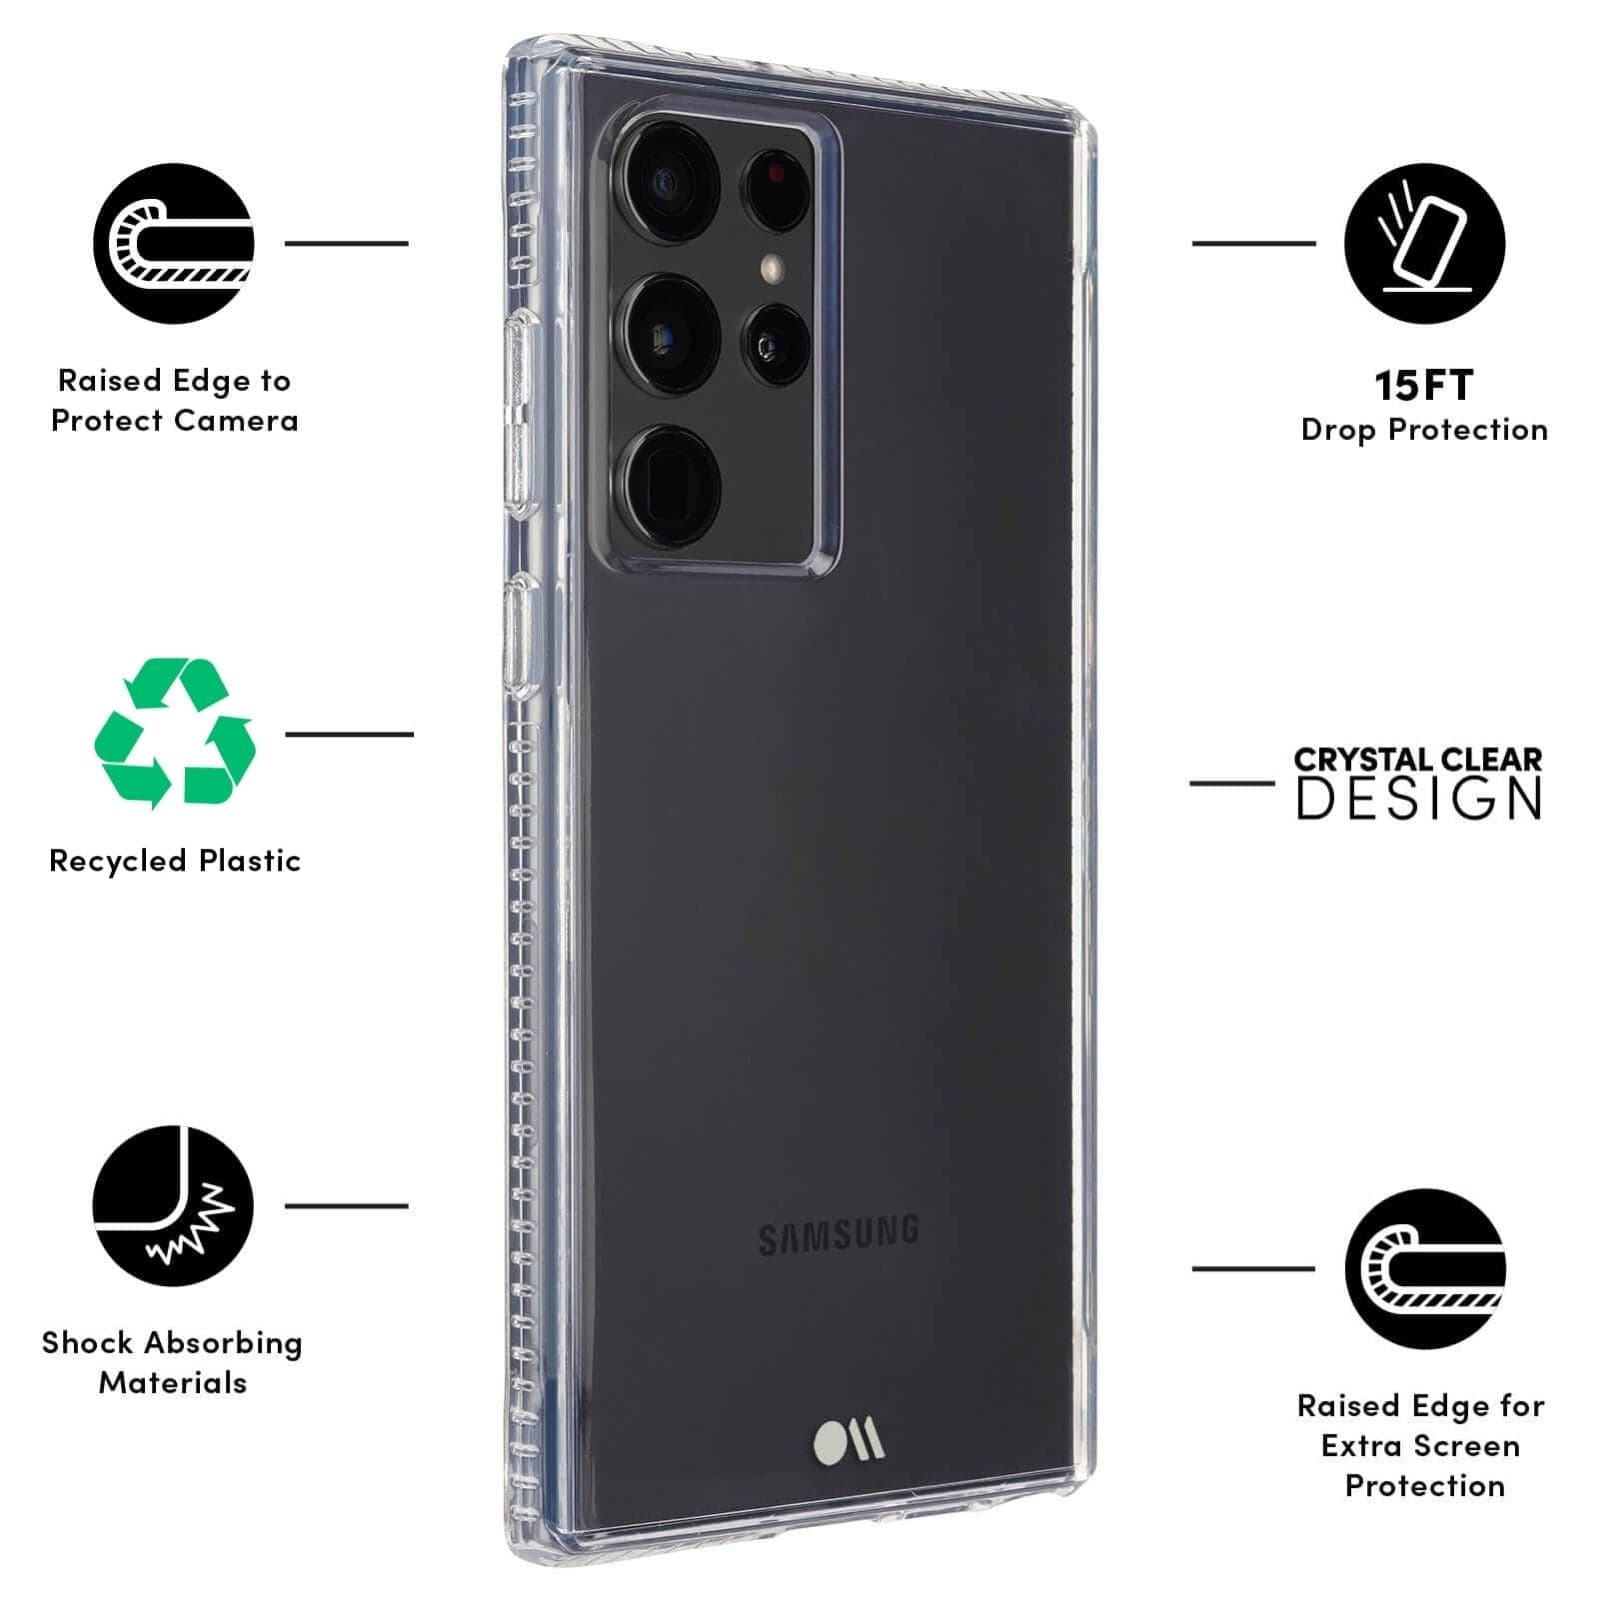 FEATURES: RAISED EDGE TO PROTECT CAMERA, RECYCLED PLASTIC, SHOCK ABSORBING MATERIALS, 15FT DROP PROTECTION, CRYSTAL CLEAR DESIGN, RAISED EDGE FOR EXTRA SCREEN PROTECTION. COLOR::CLEAR